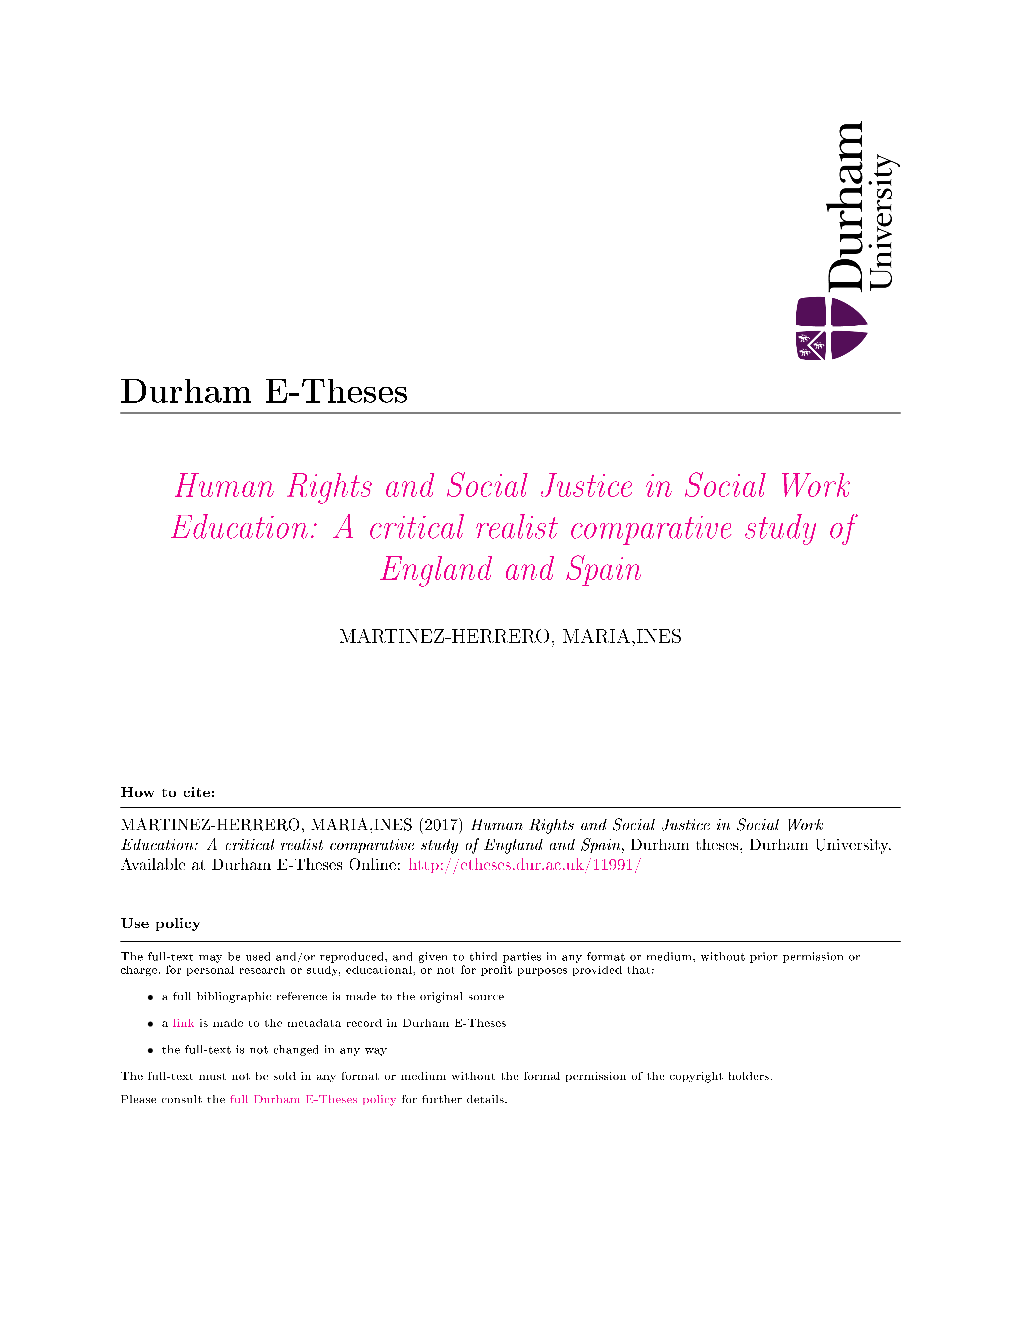 Human Rights and Social Justice in Social Work Education: a Critical Realist Comparative Study of England and Spain